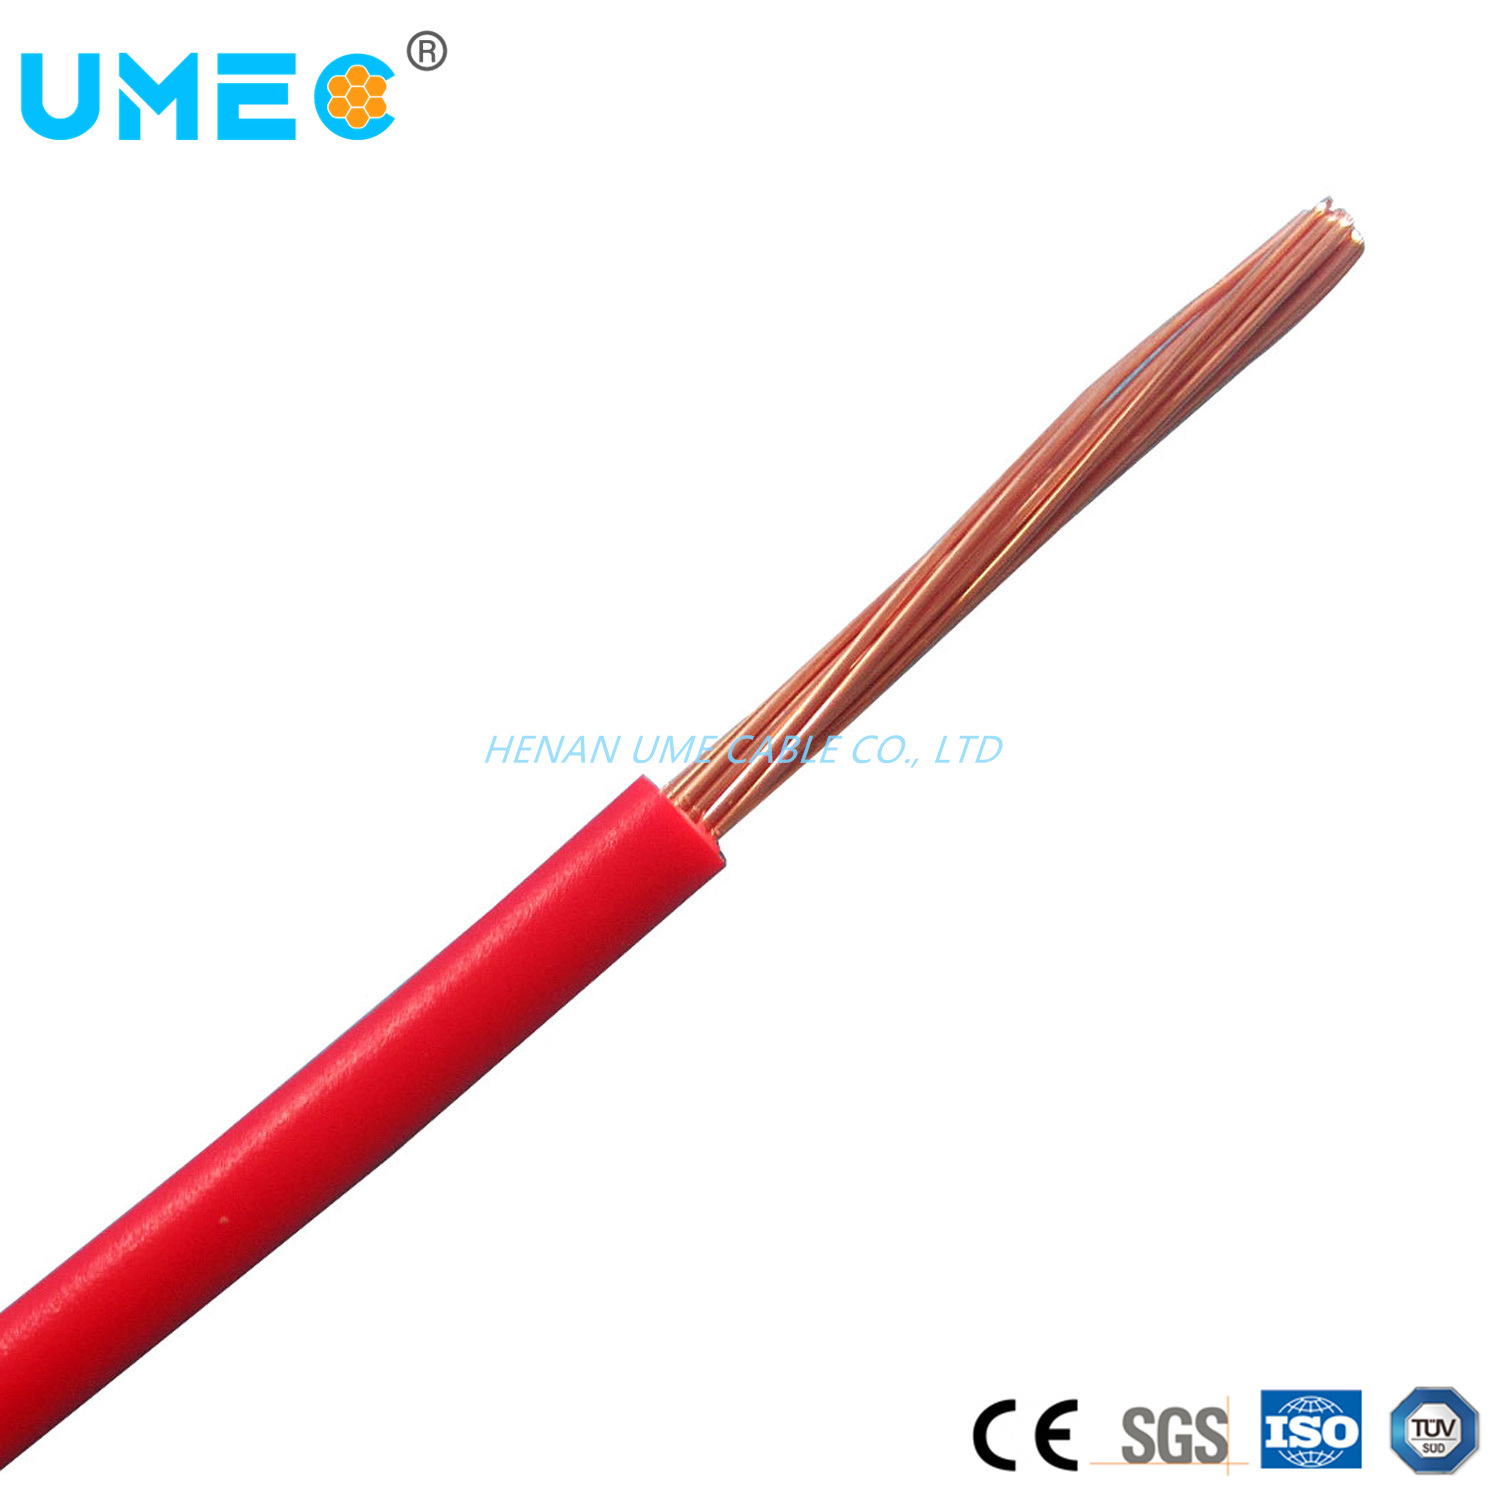 Tw Cable 60c 75c 600V Building Electric Cable Wire14AWG 12AWG 10AWG 8AWG 6AWG Thw